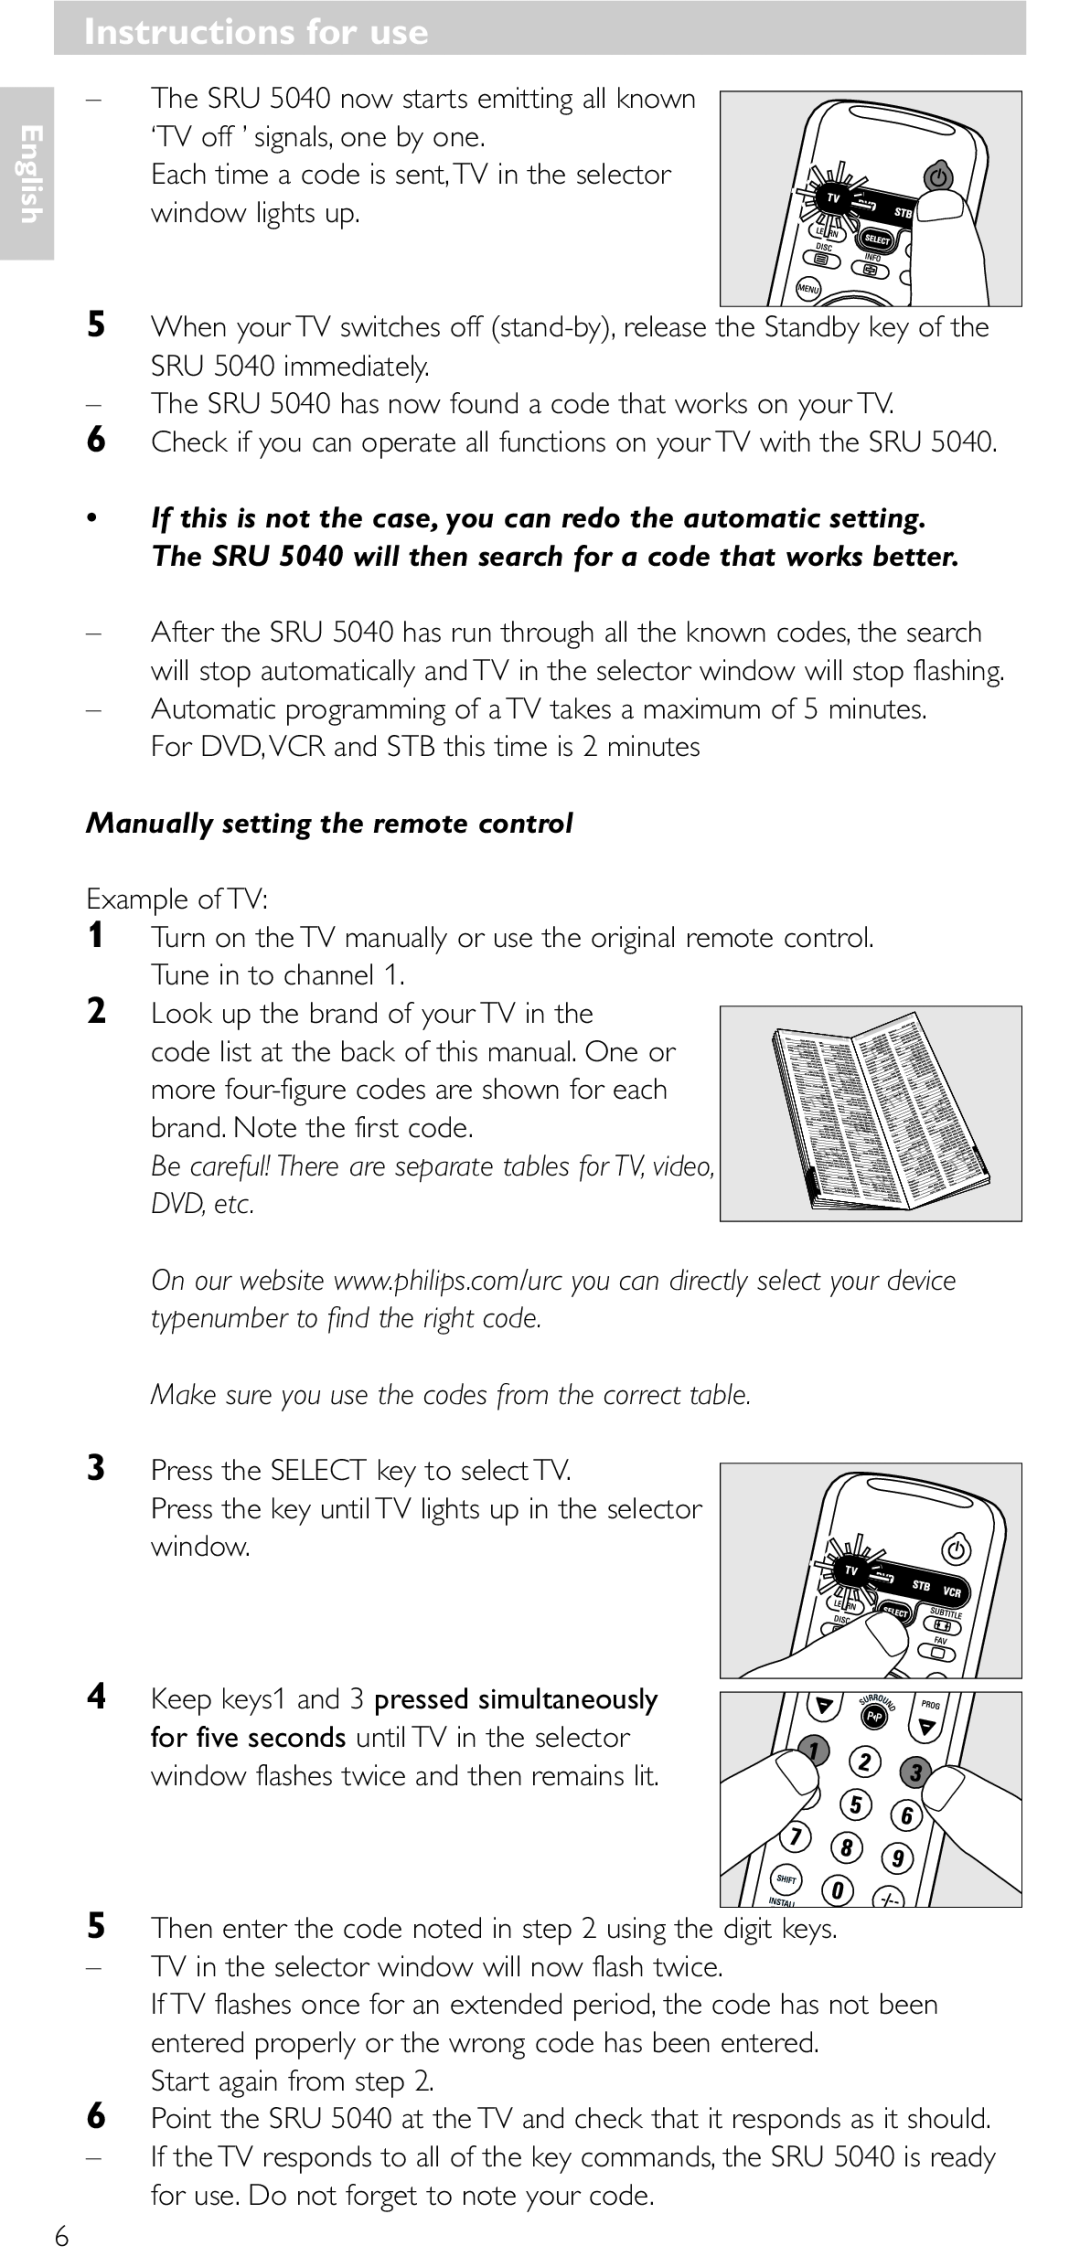 Hitachi SRU 5040/05 manual Manually setting the remote control, Make sure you use the codes from the correct table, English 